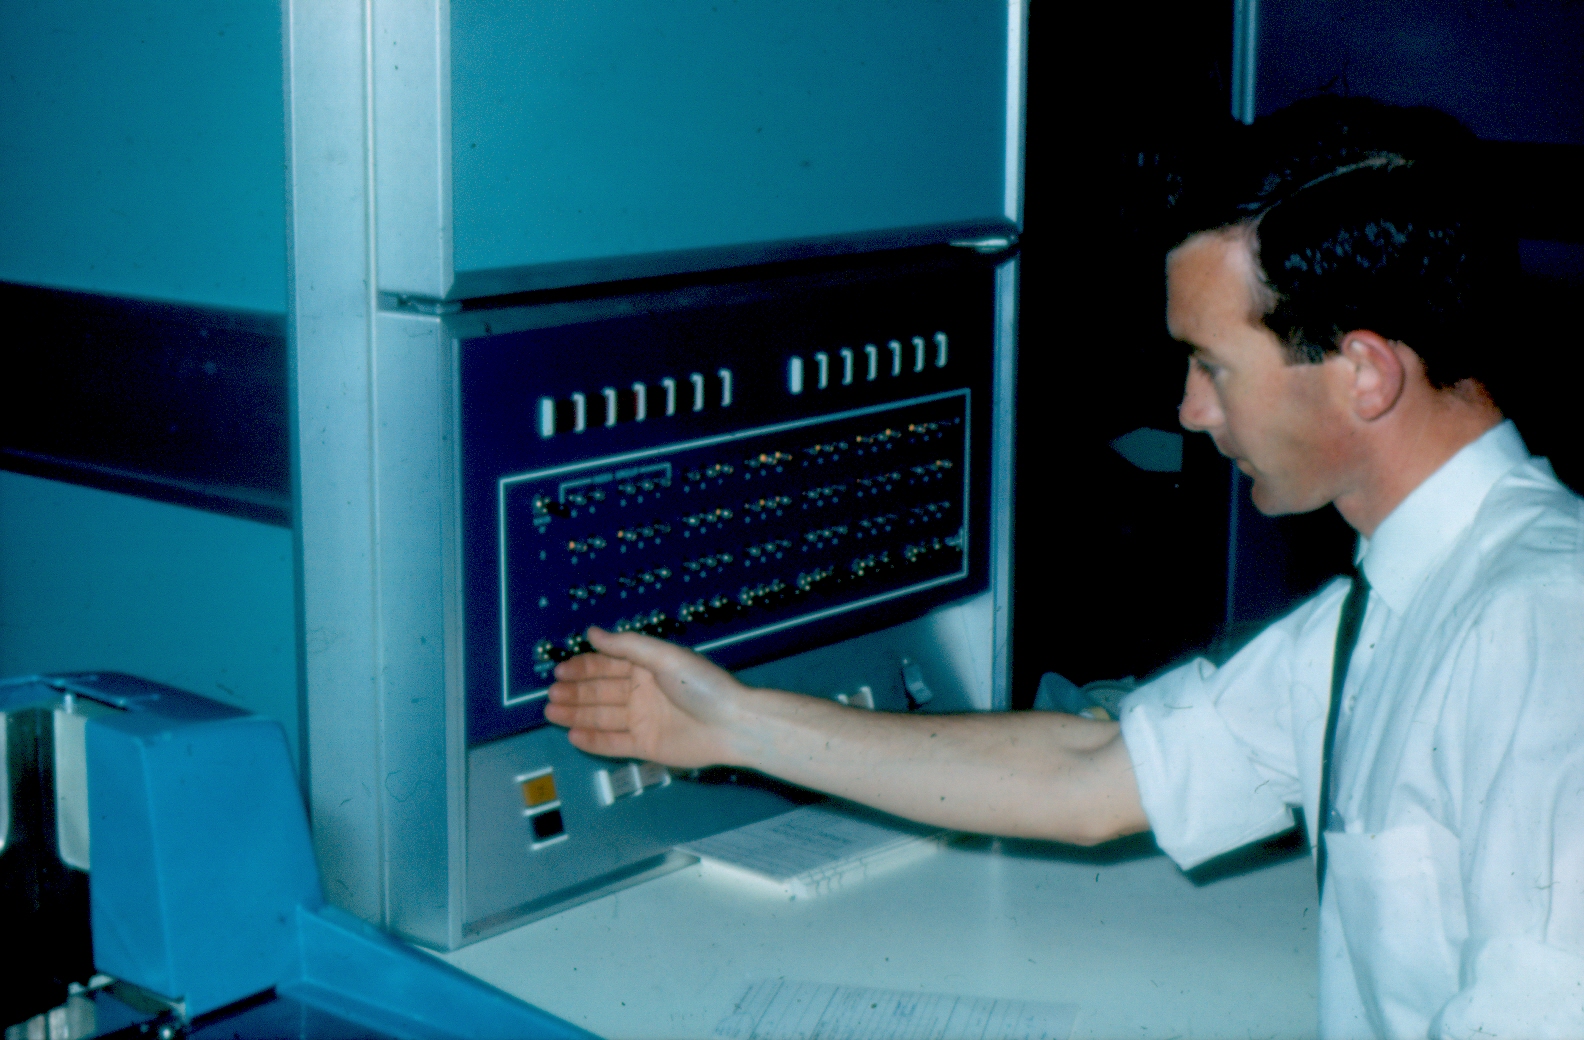 ANZ staff member at the control panel of the newly installed General Electric 225 which was ANZ's FIRST computer in 1965. 